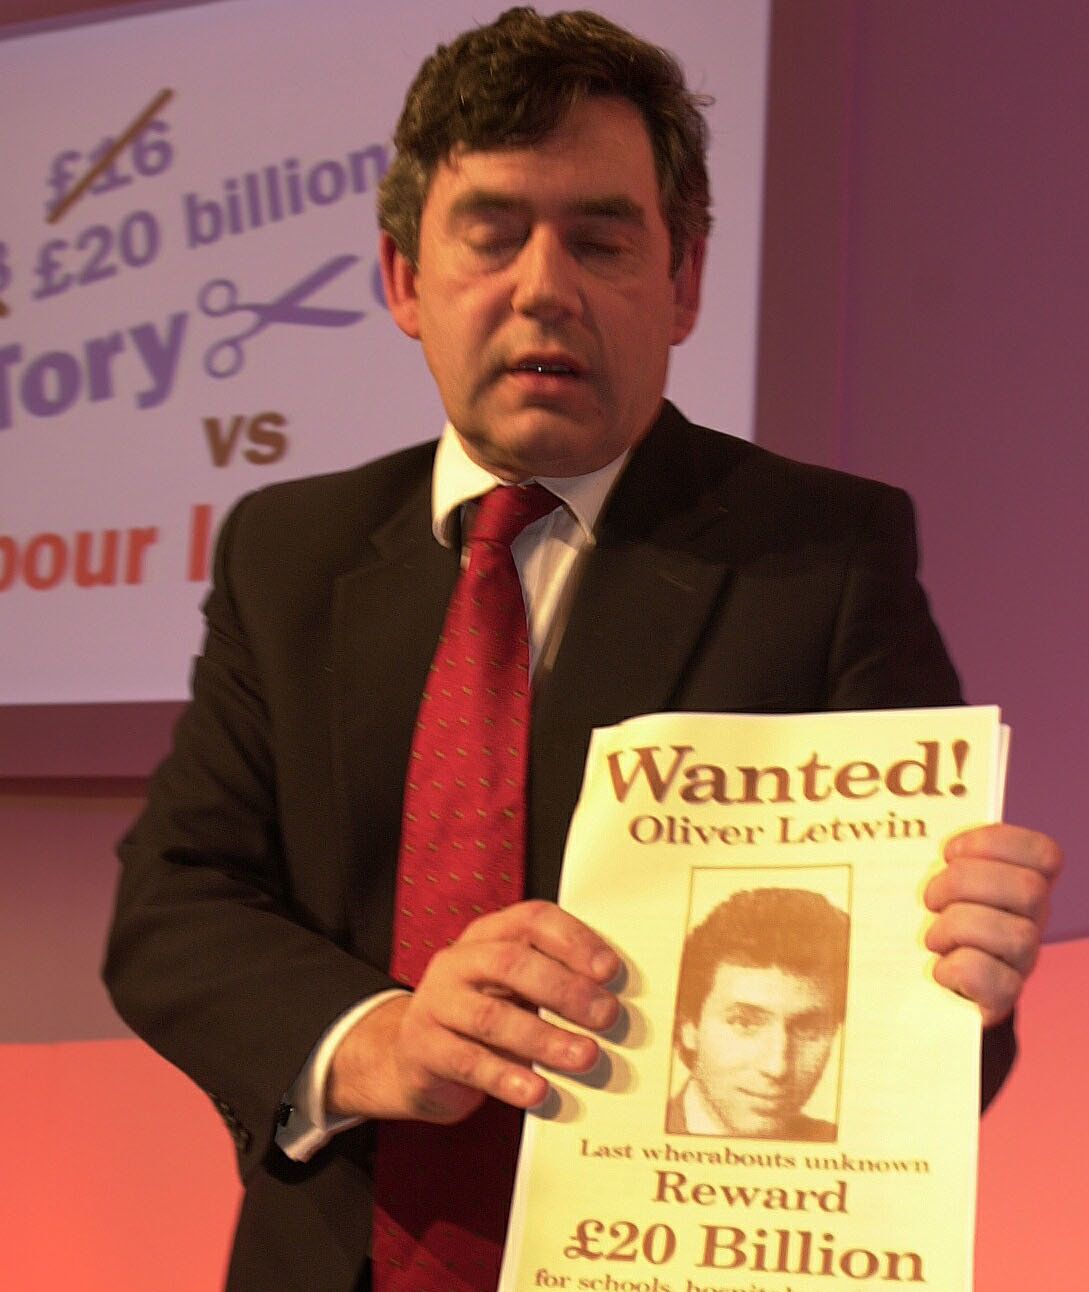 Gordon Brown with his 'Wanted' poster